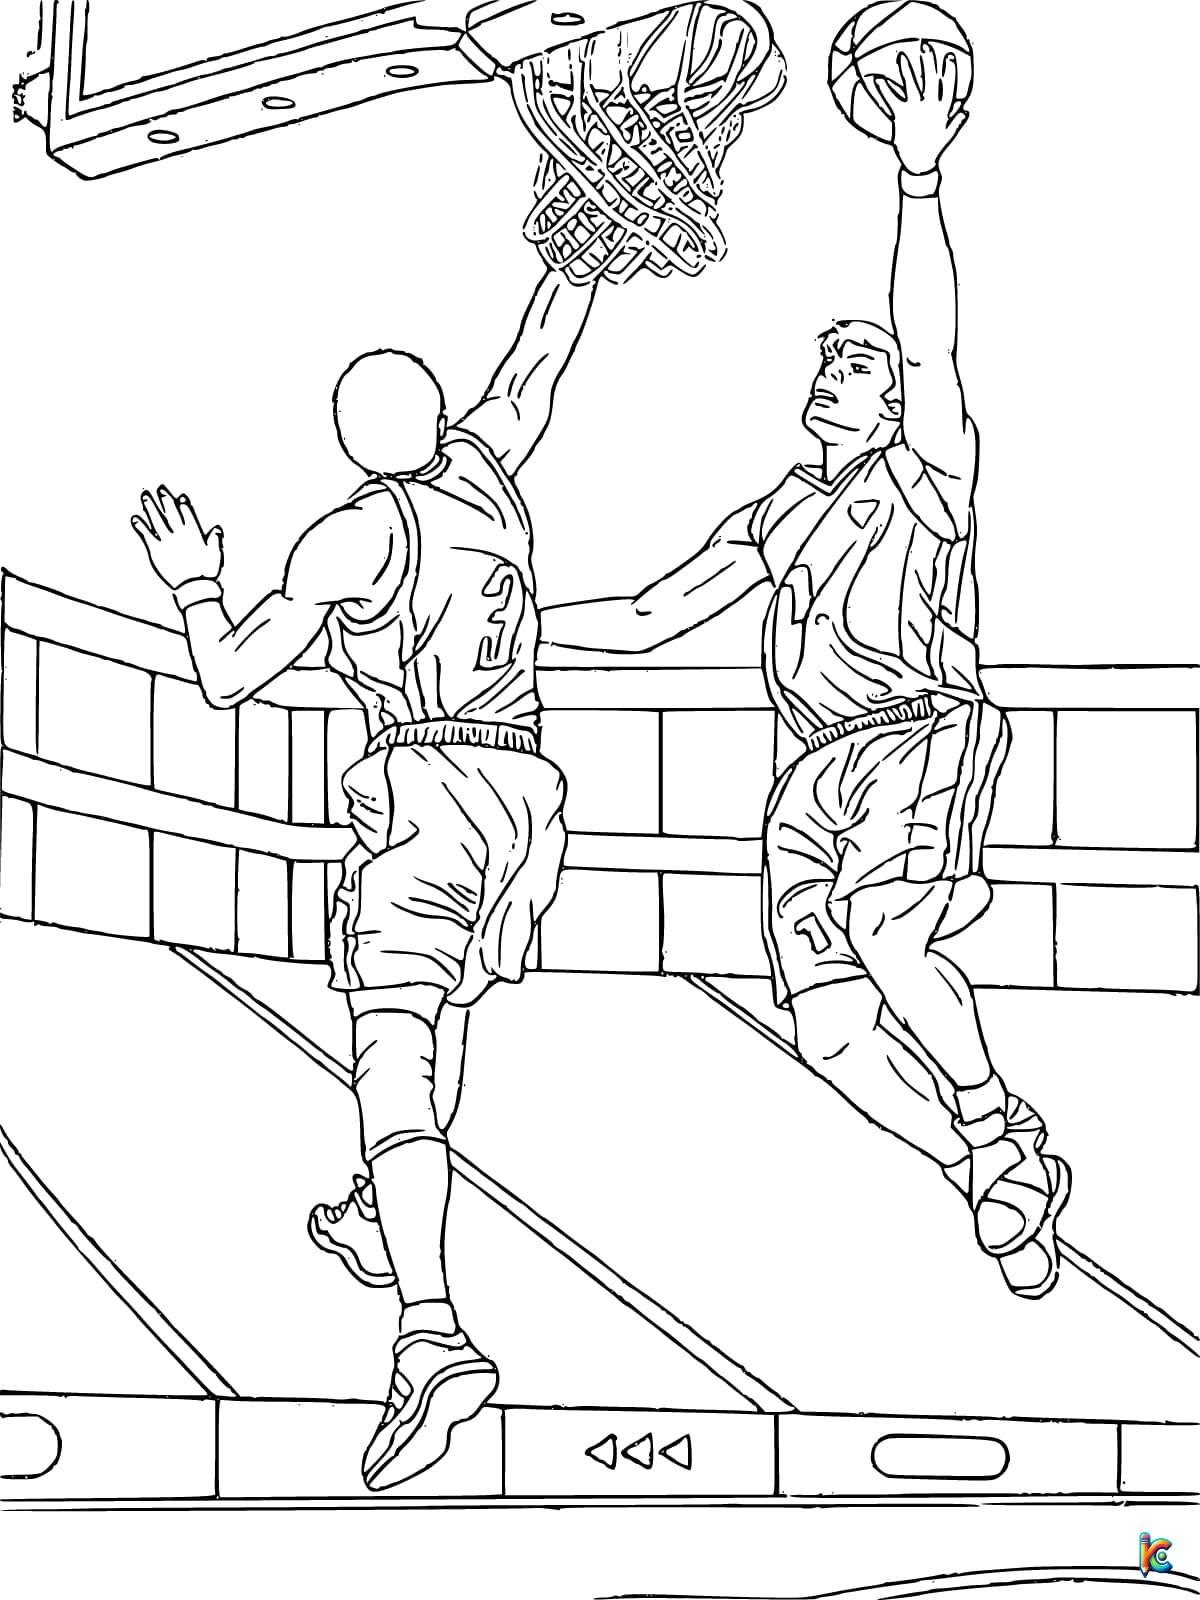 coloring pages for basketball